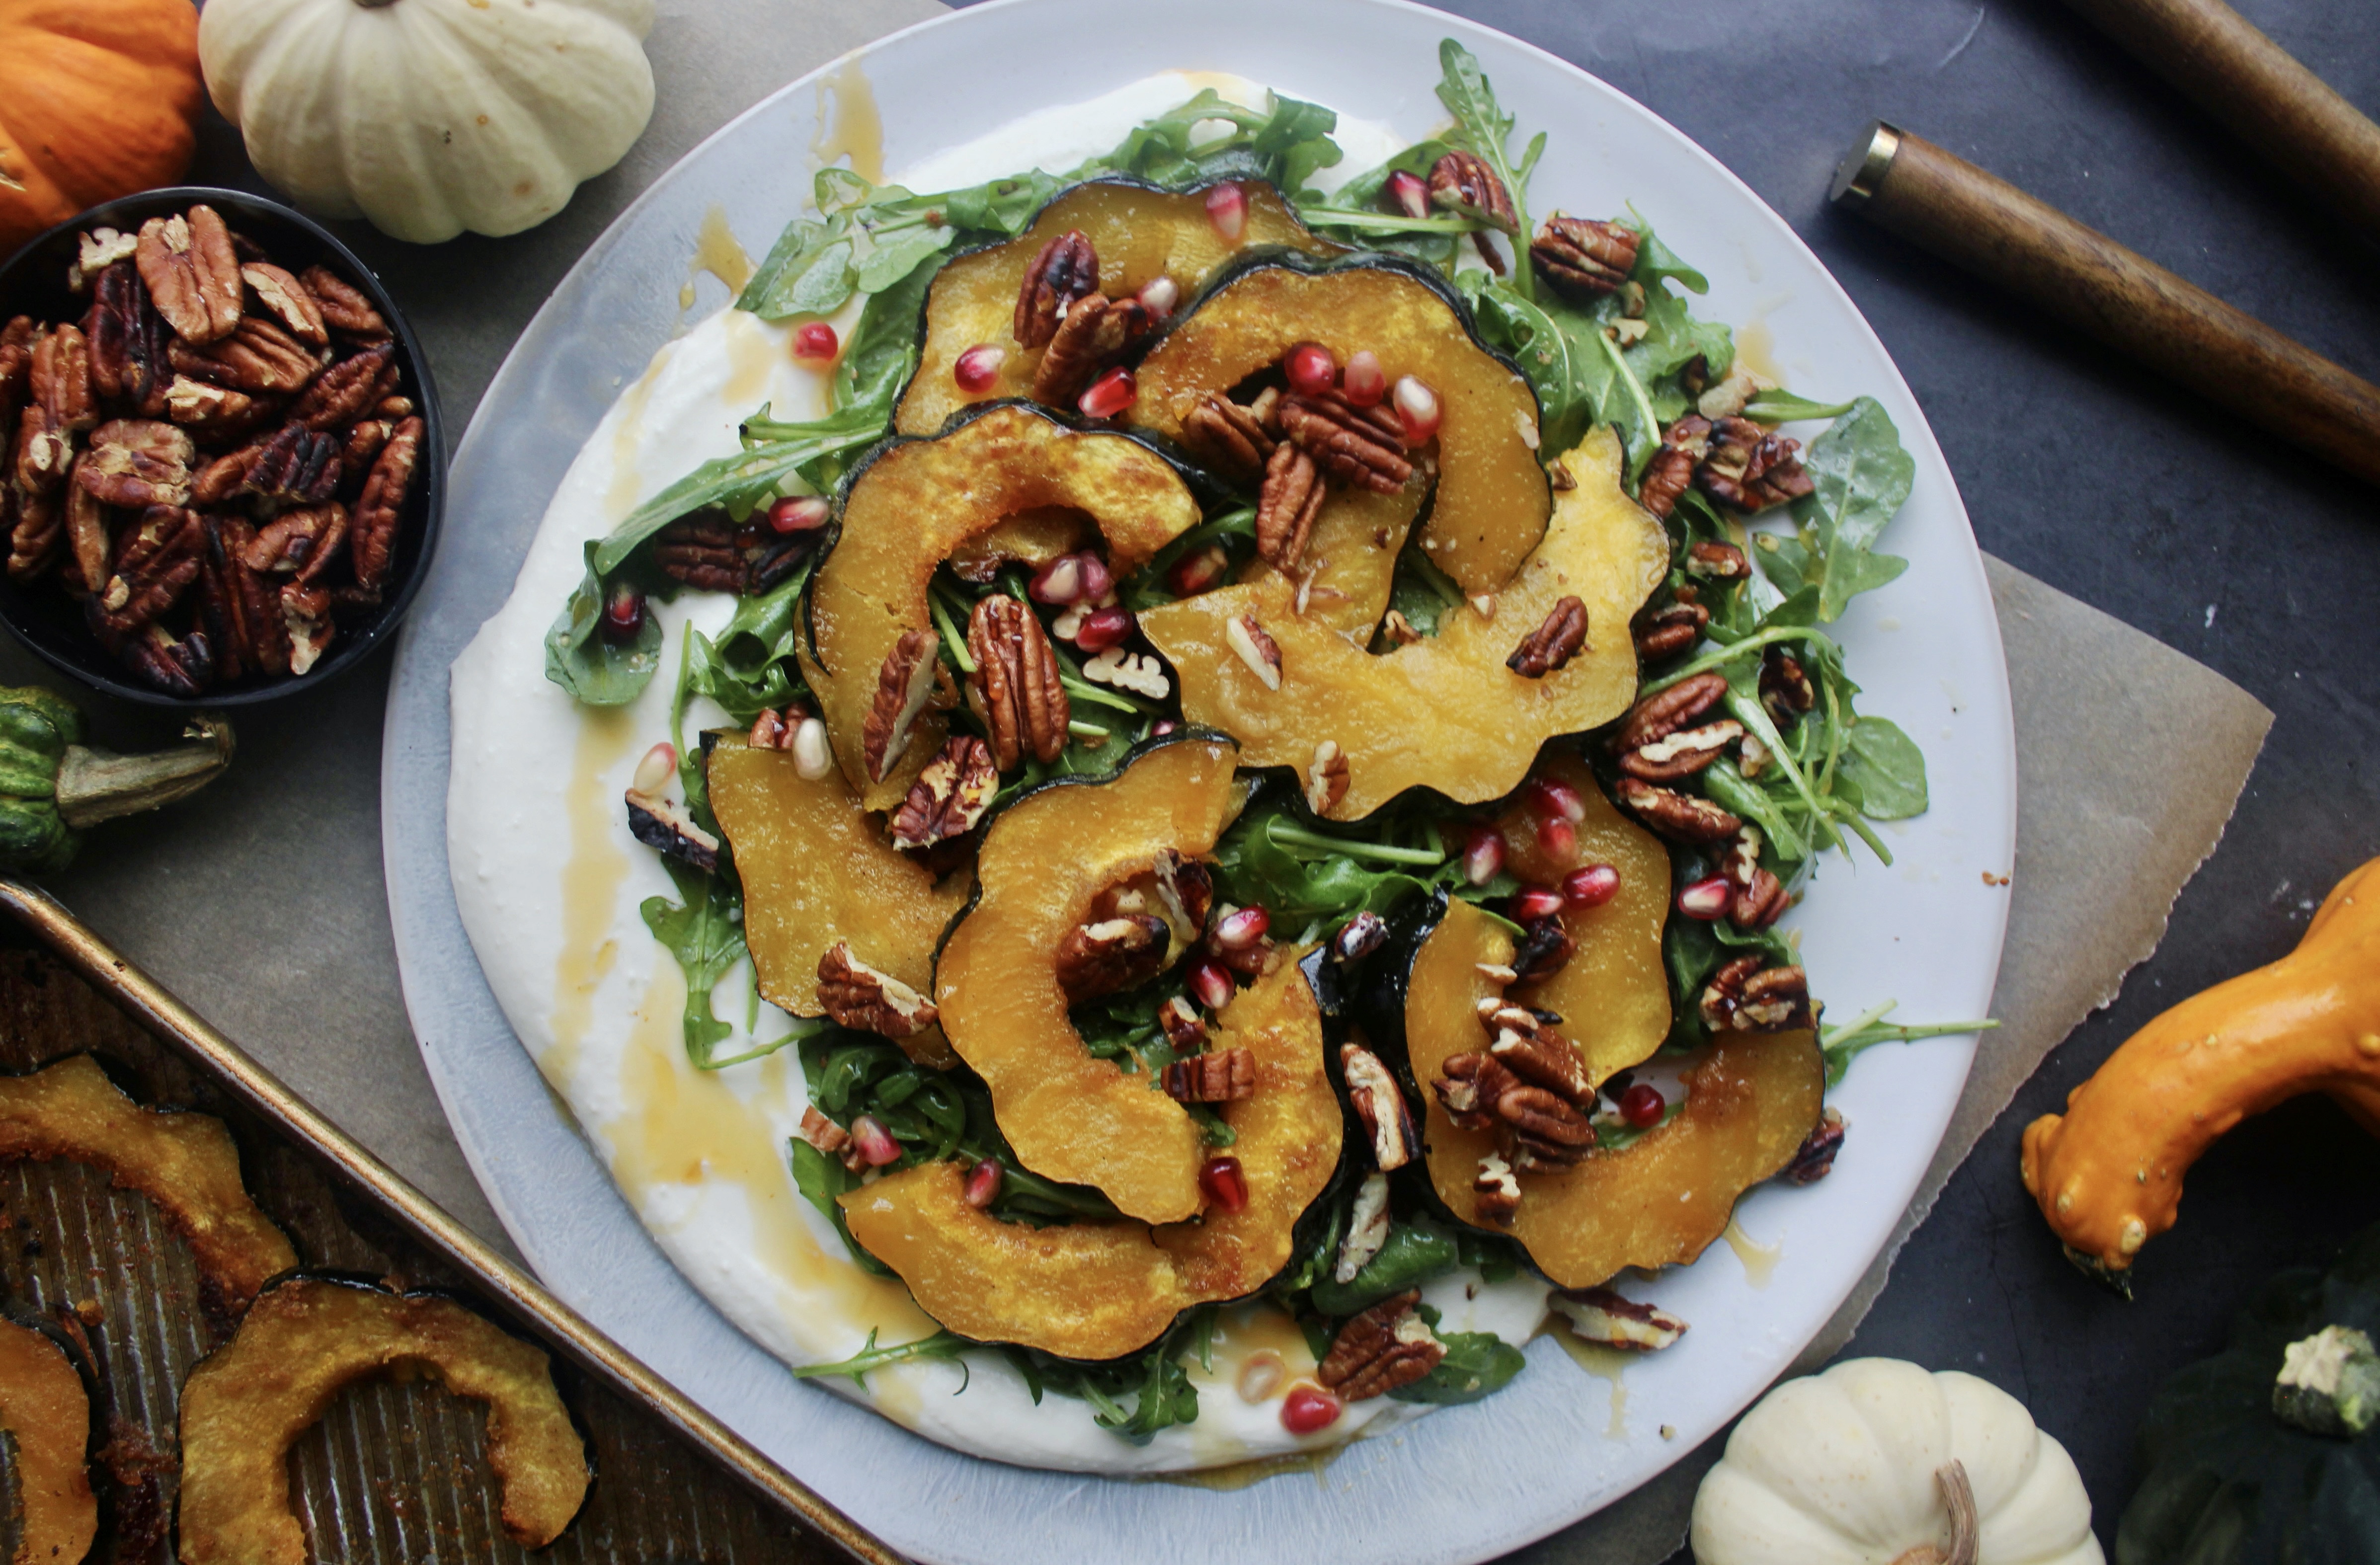 A thick, creamy layer of whipped mascarpone topped with lightly dressed arugula, perfectly roasted acorn squash, all the crispy crunchy textures, and a drizzle of spicy honey: this Maple Roasted Acorn Squash with Mascarpone, Pomegranate, and Hot Honey is the ultimate fall party pleaser!